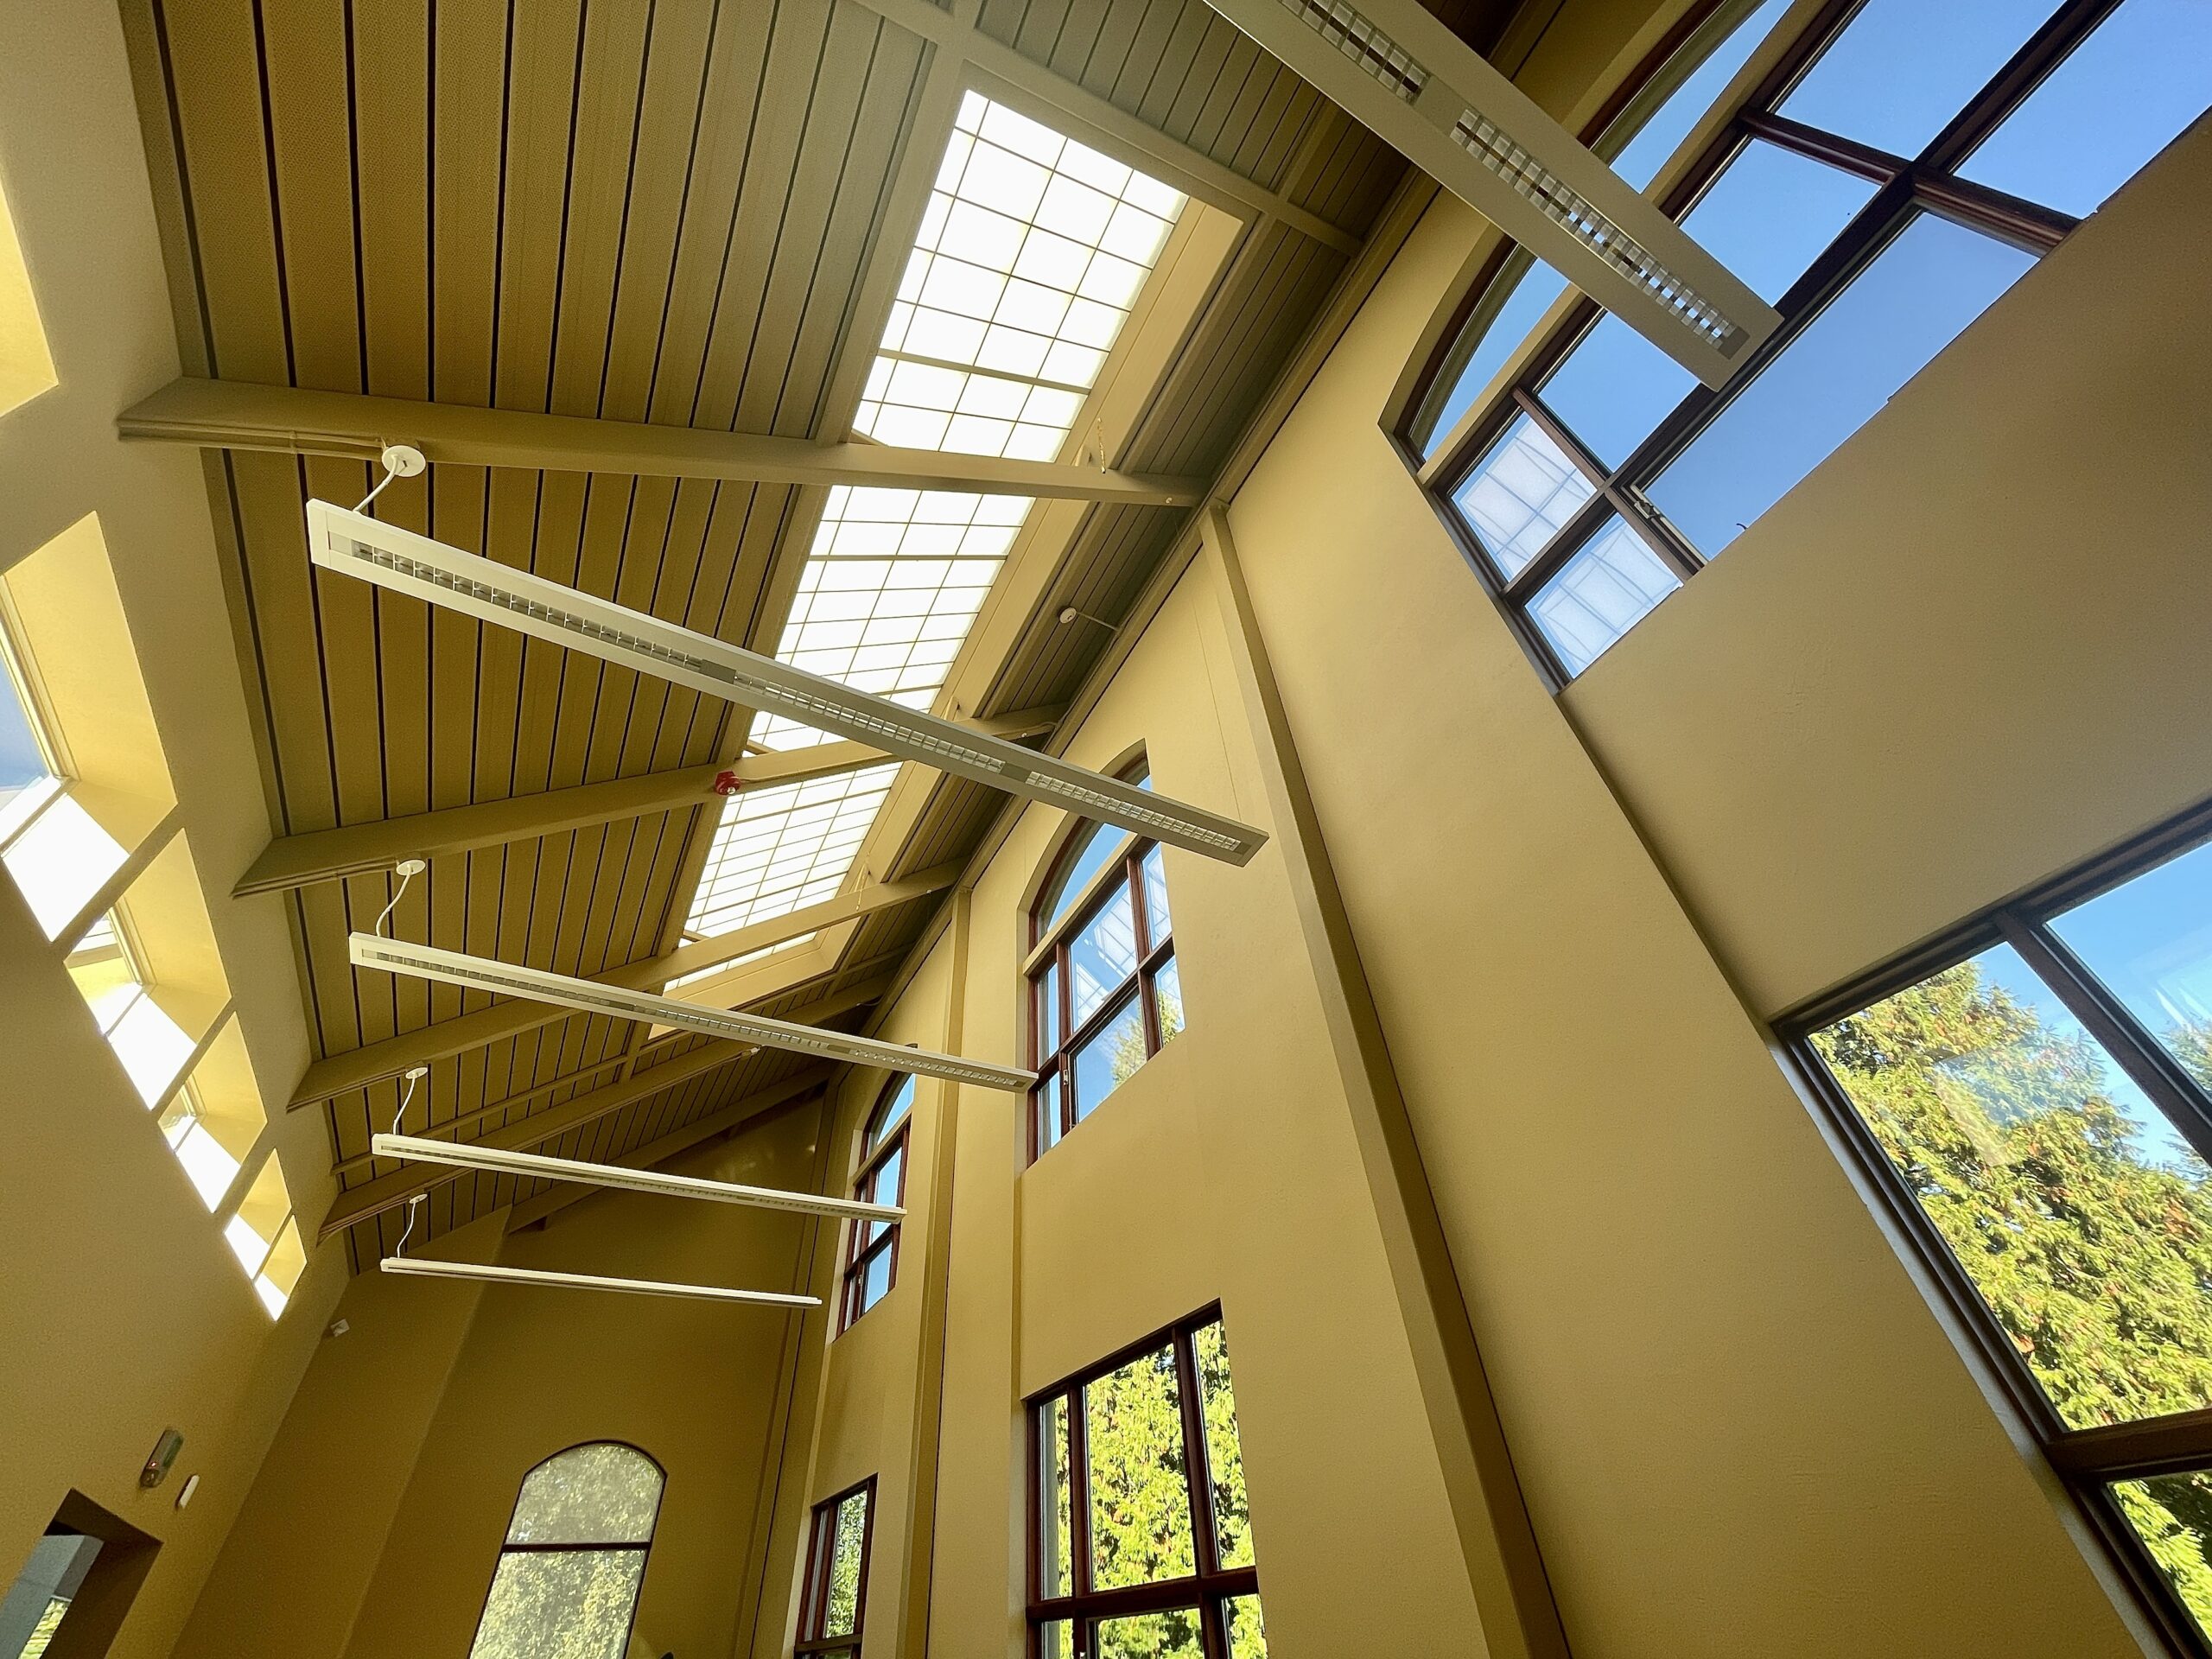 Green building features on display in the 21 Acres Great Hall include LED lighting, clerestory windows and high performance translucent skylights.